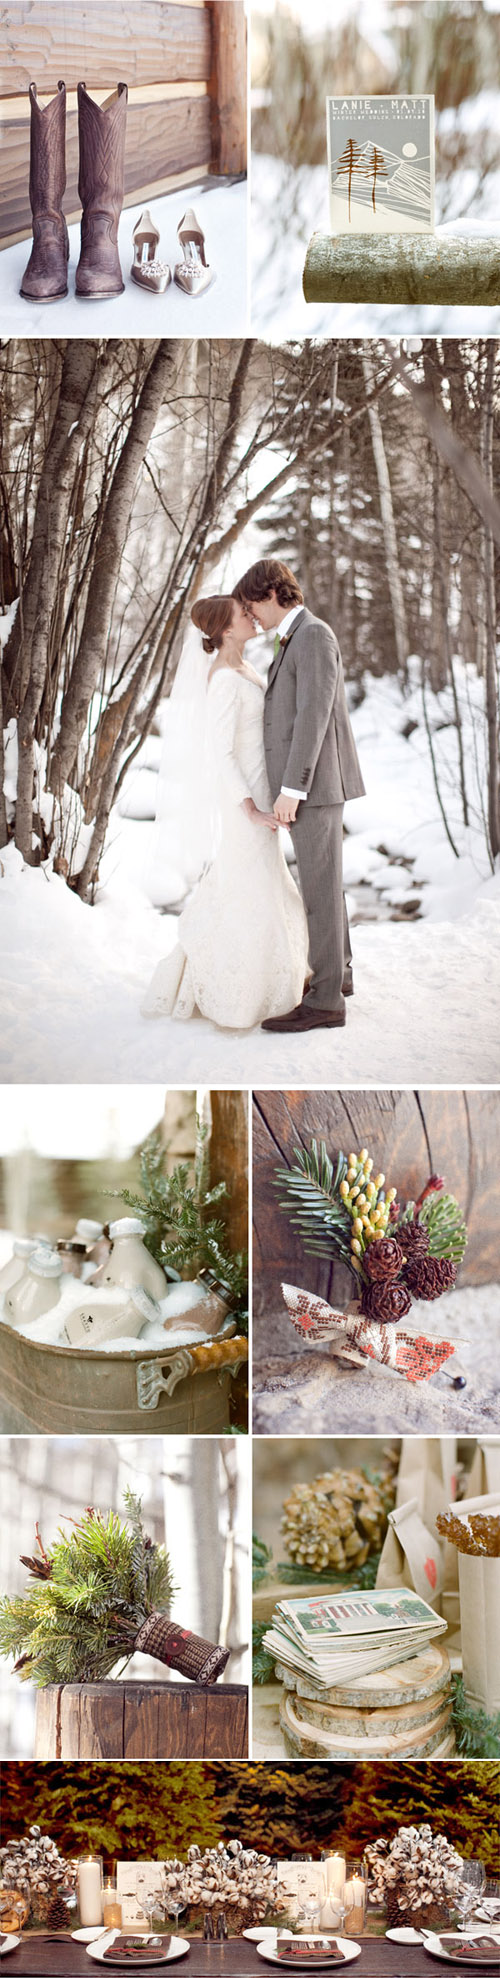 snowy romantic Colorado wedding from Lisa Vorce of Oh How Charming! photographed by Aaron Delesie